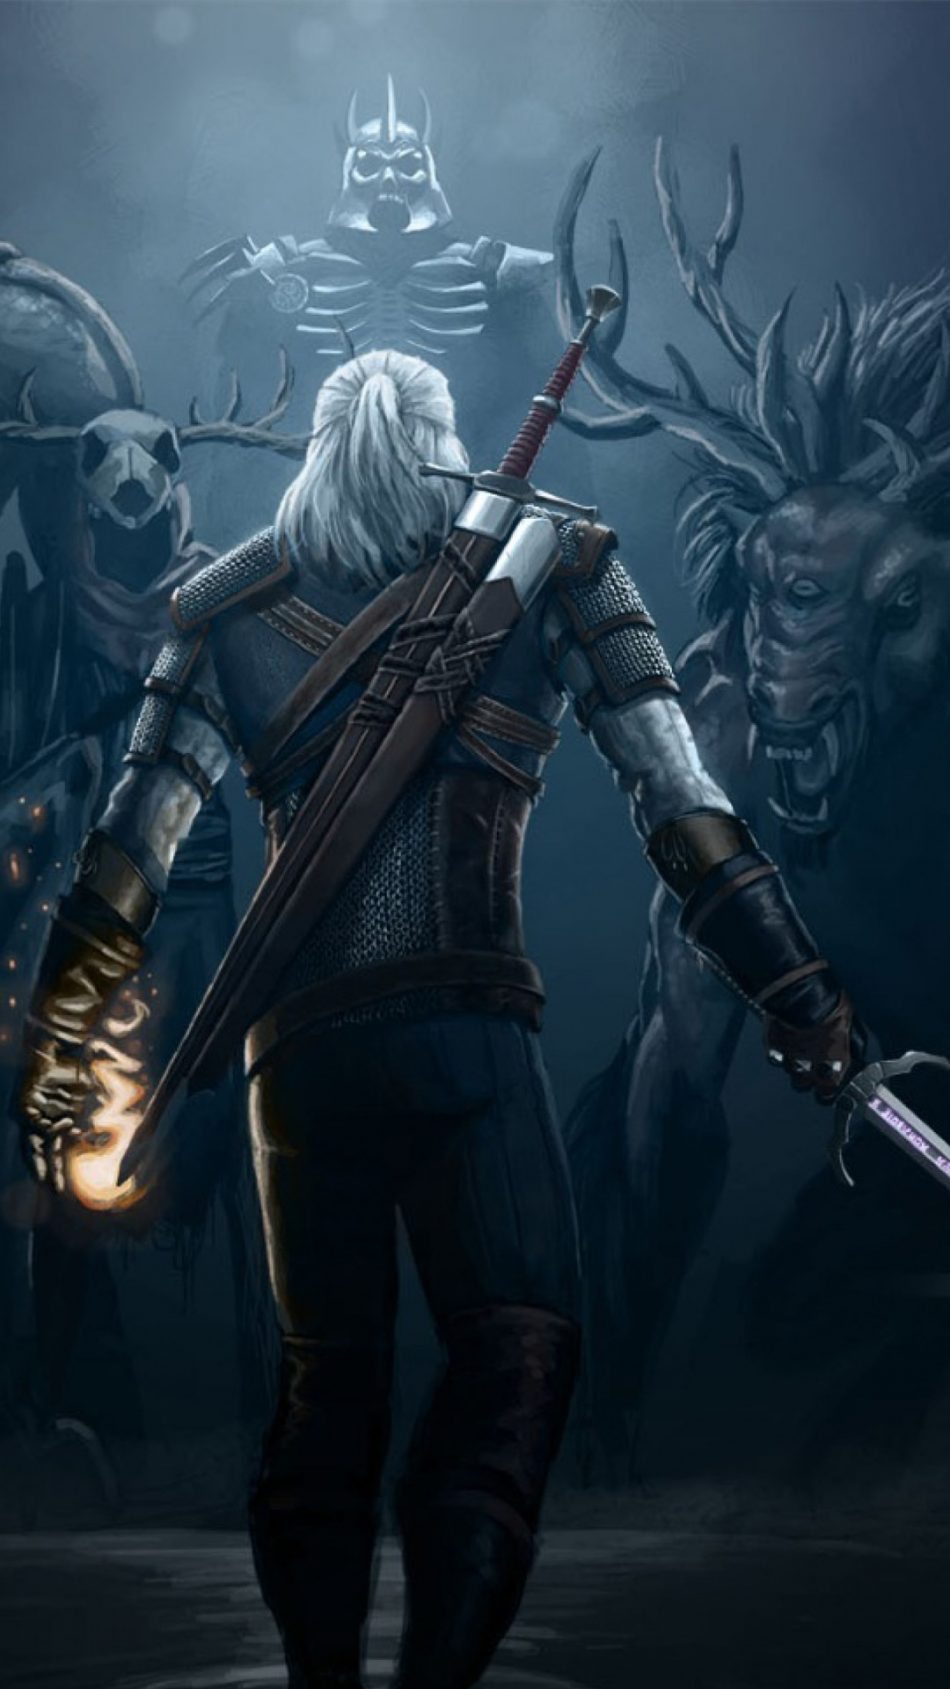 witcher mobile wallpaper,action adventure game,cg artwork,illustration,fictional character,pc game